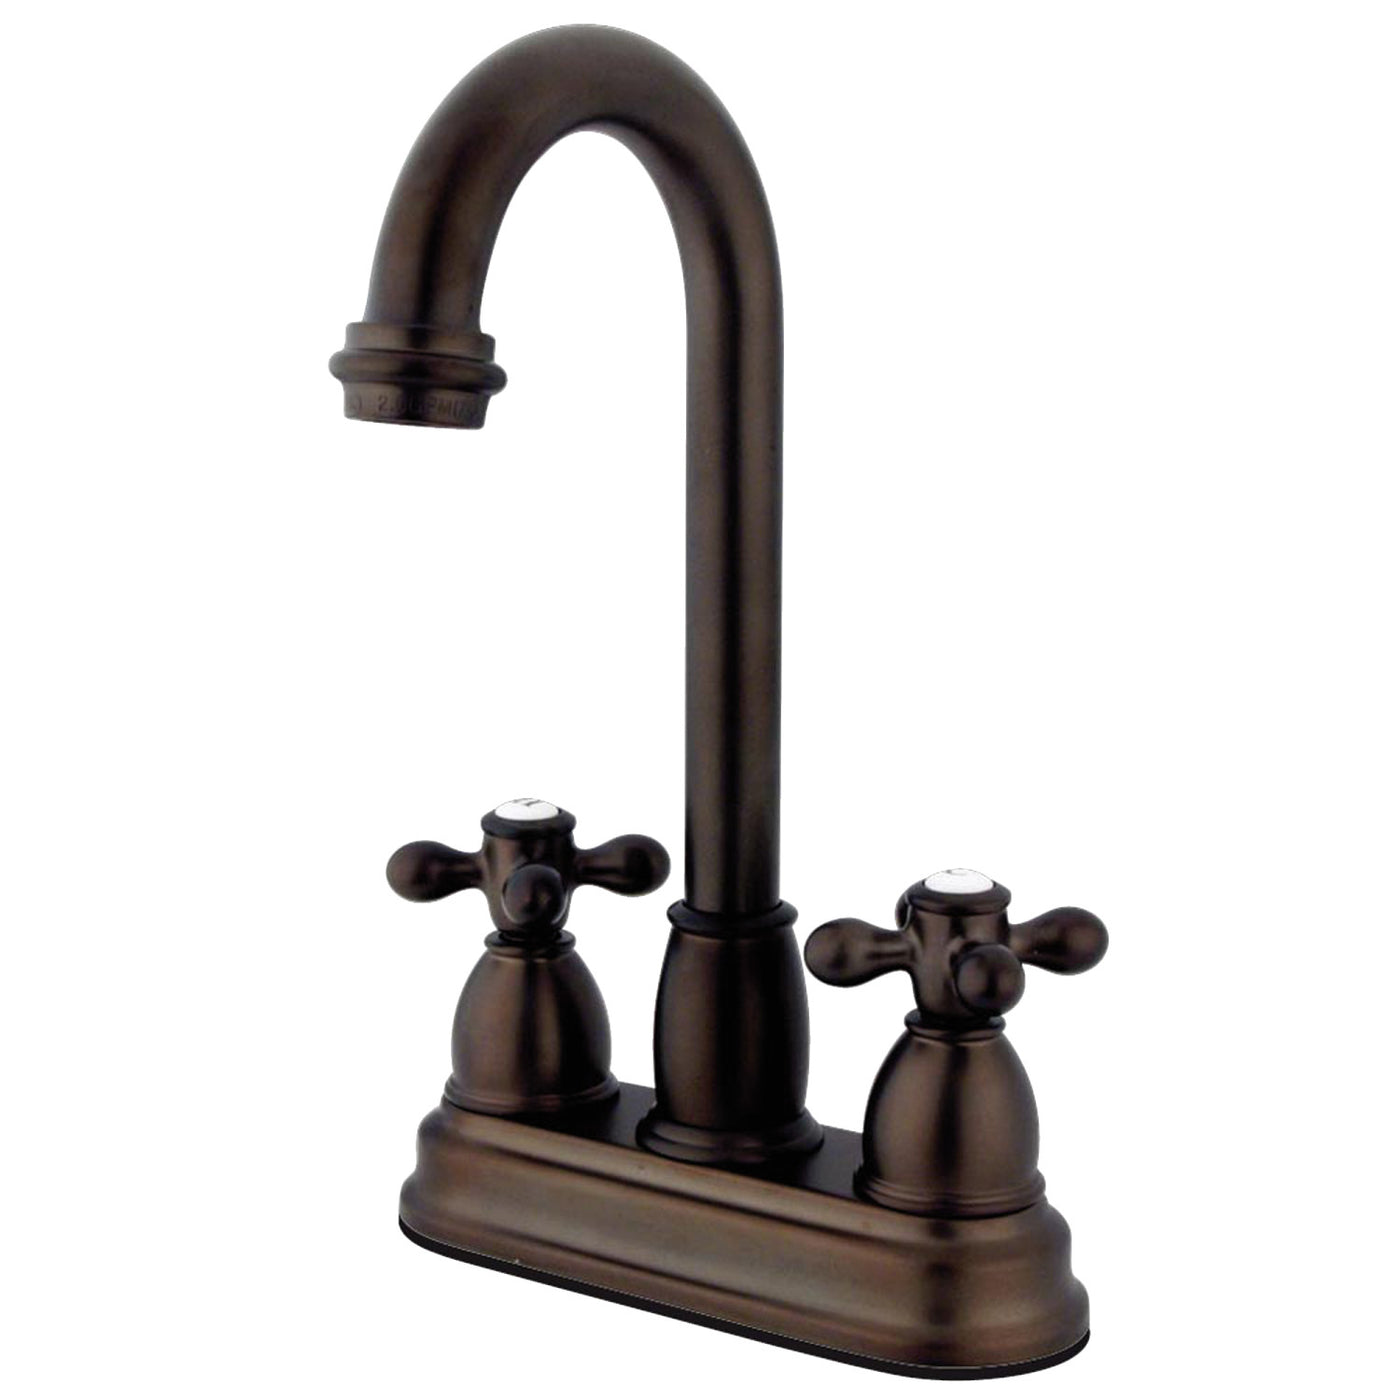 Elements of Design EB3495AX 4-Inch Centerset Bar Faucet, Oil Rubbed Bronze